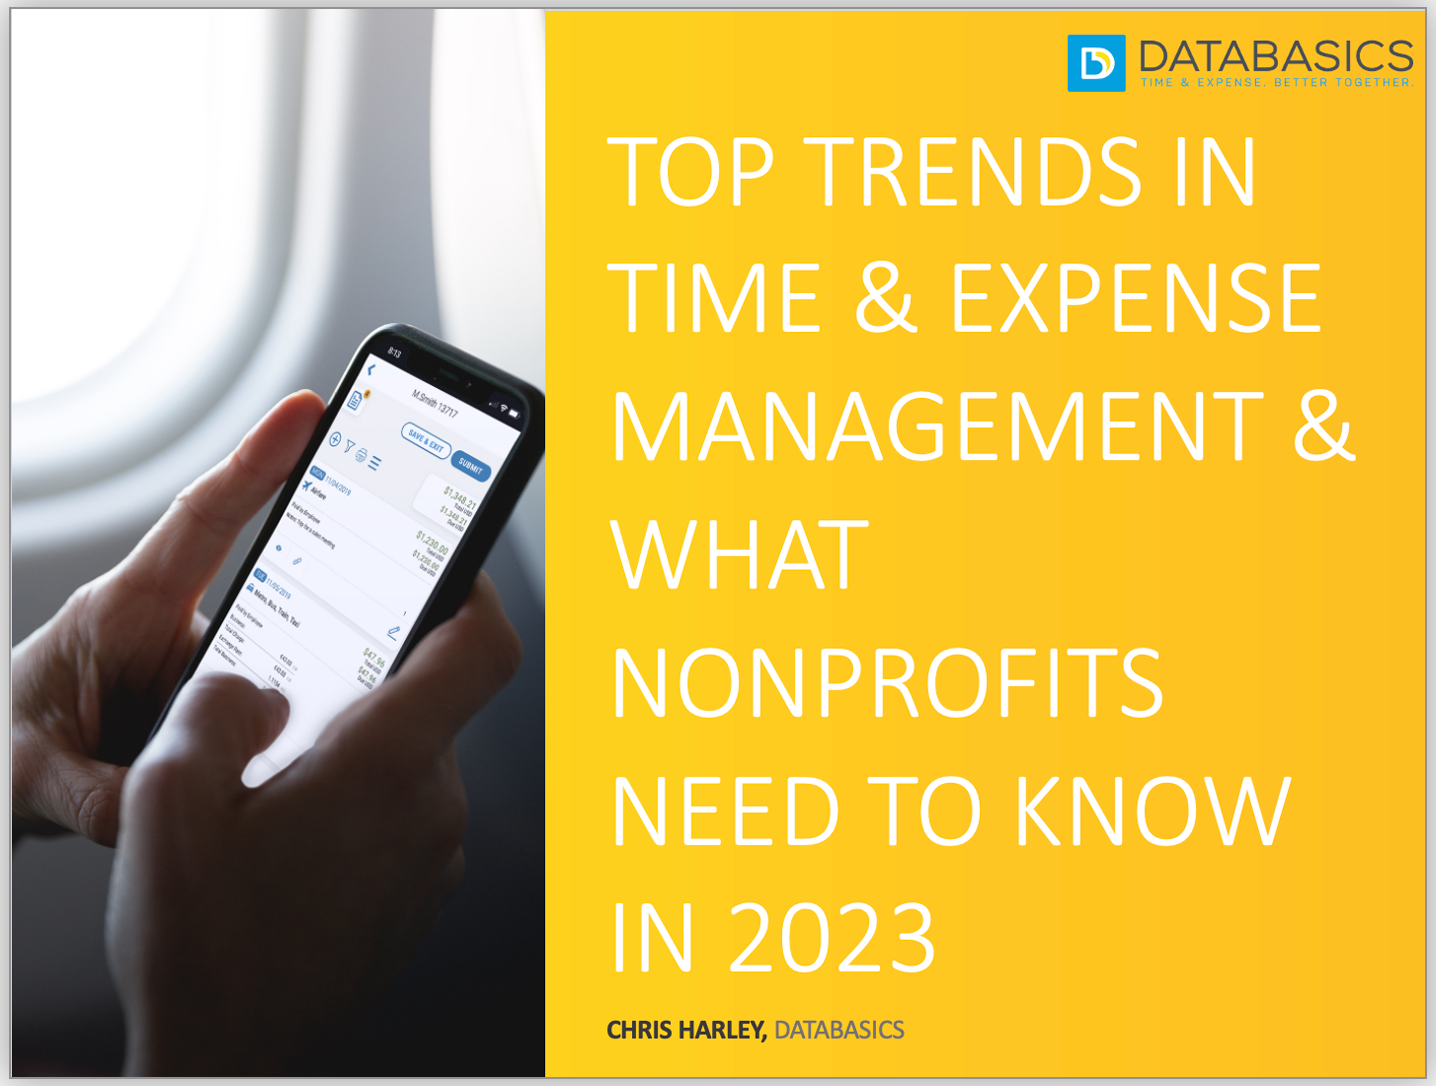 Top Trends in Time & Expense Management and What Nonprofits Need to Know in 2023